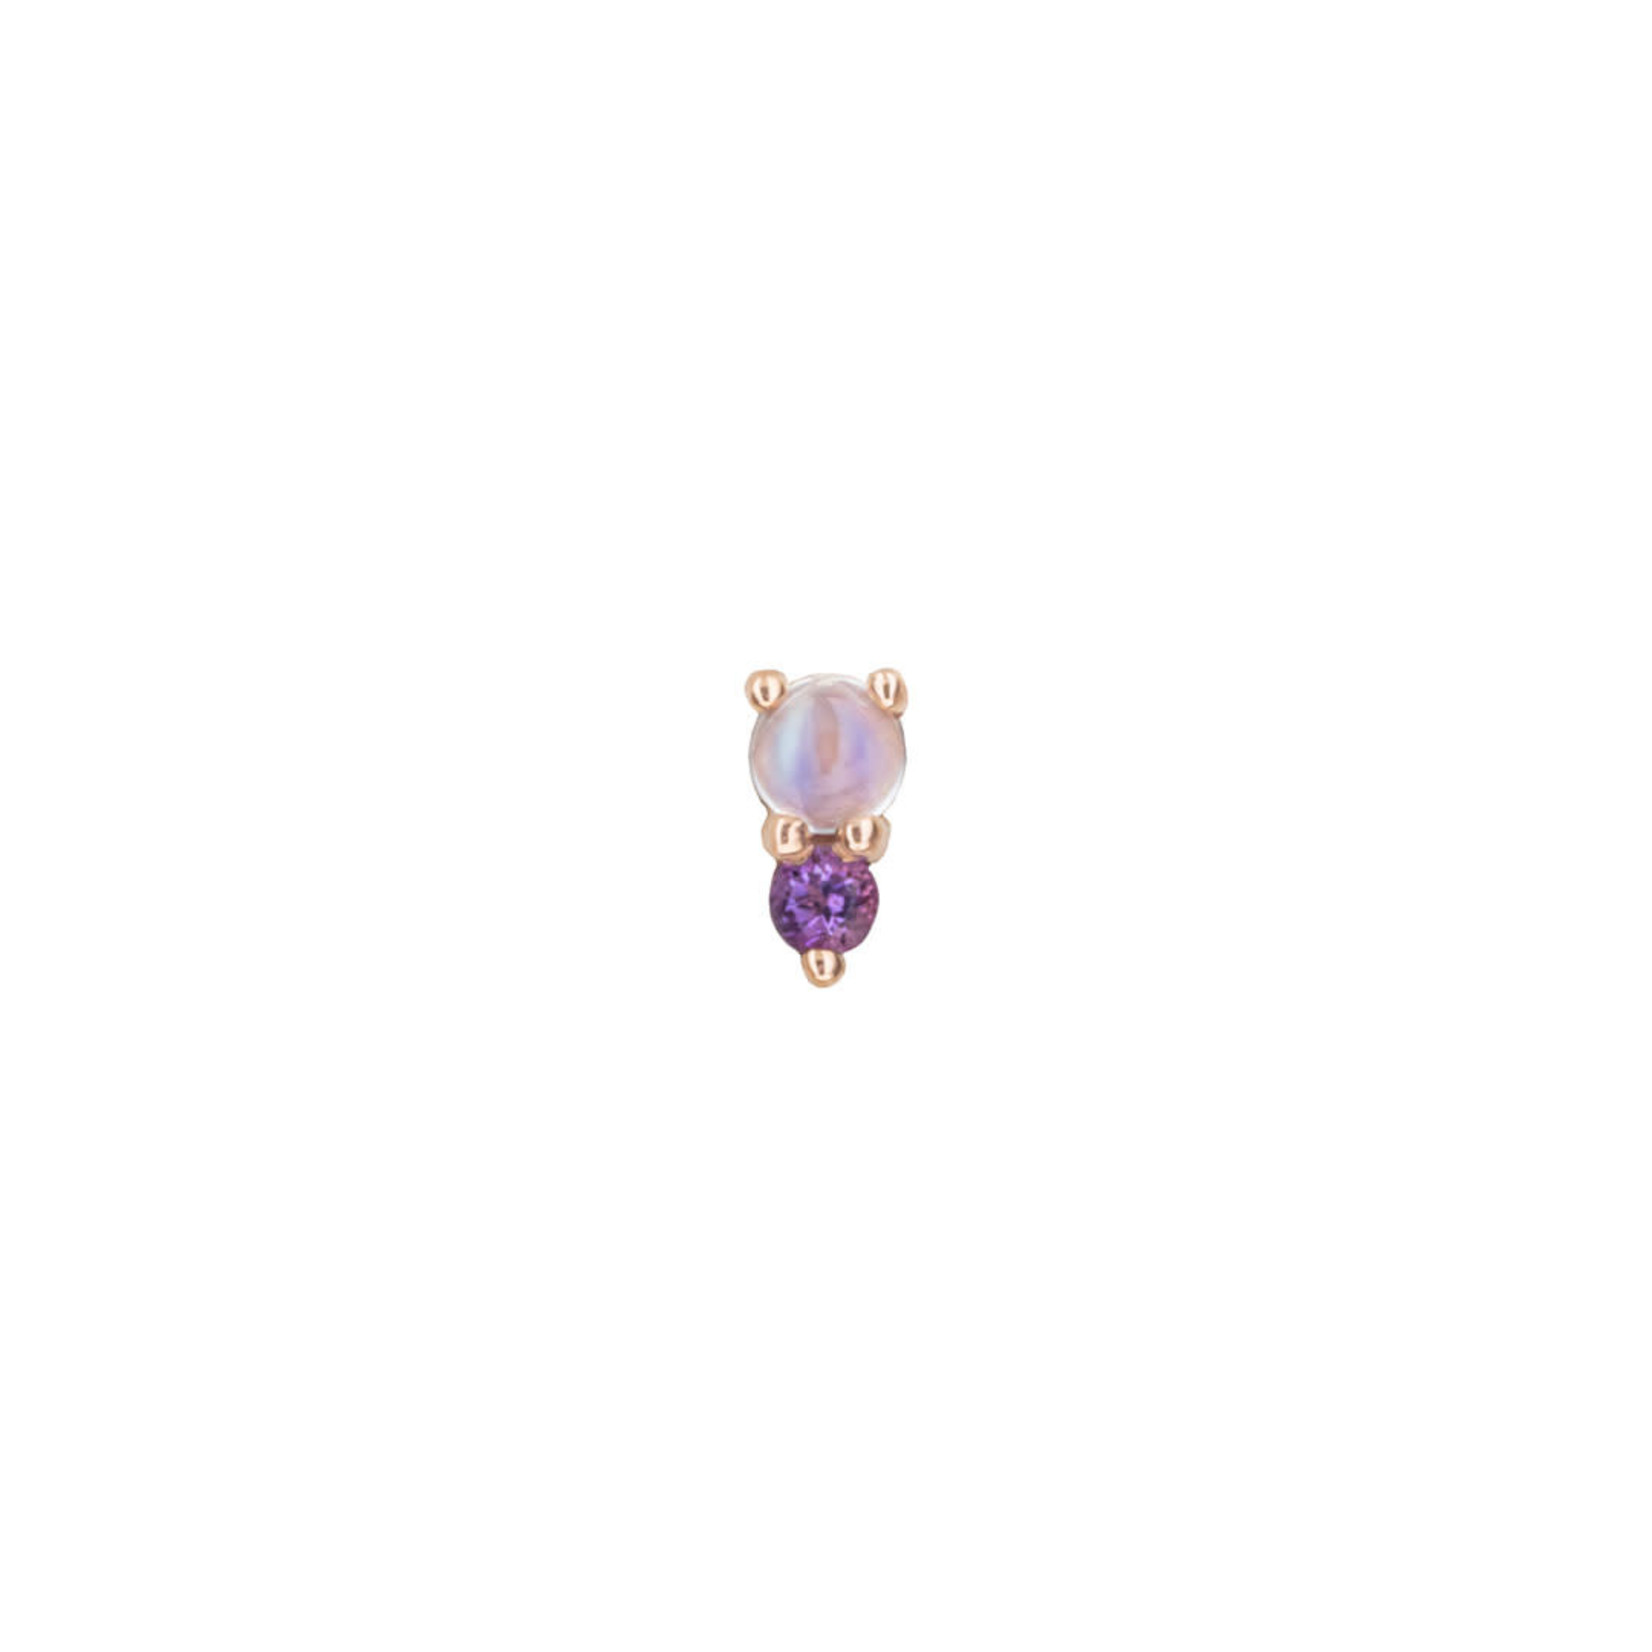 BVLA BVLA "Jeanie" 2 press fit end with 2.0 rainbow moonstone & 1.5 AA amethyst